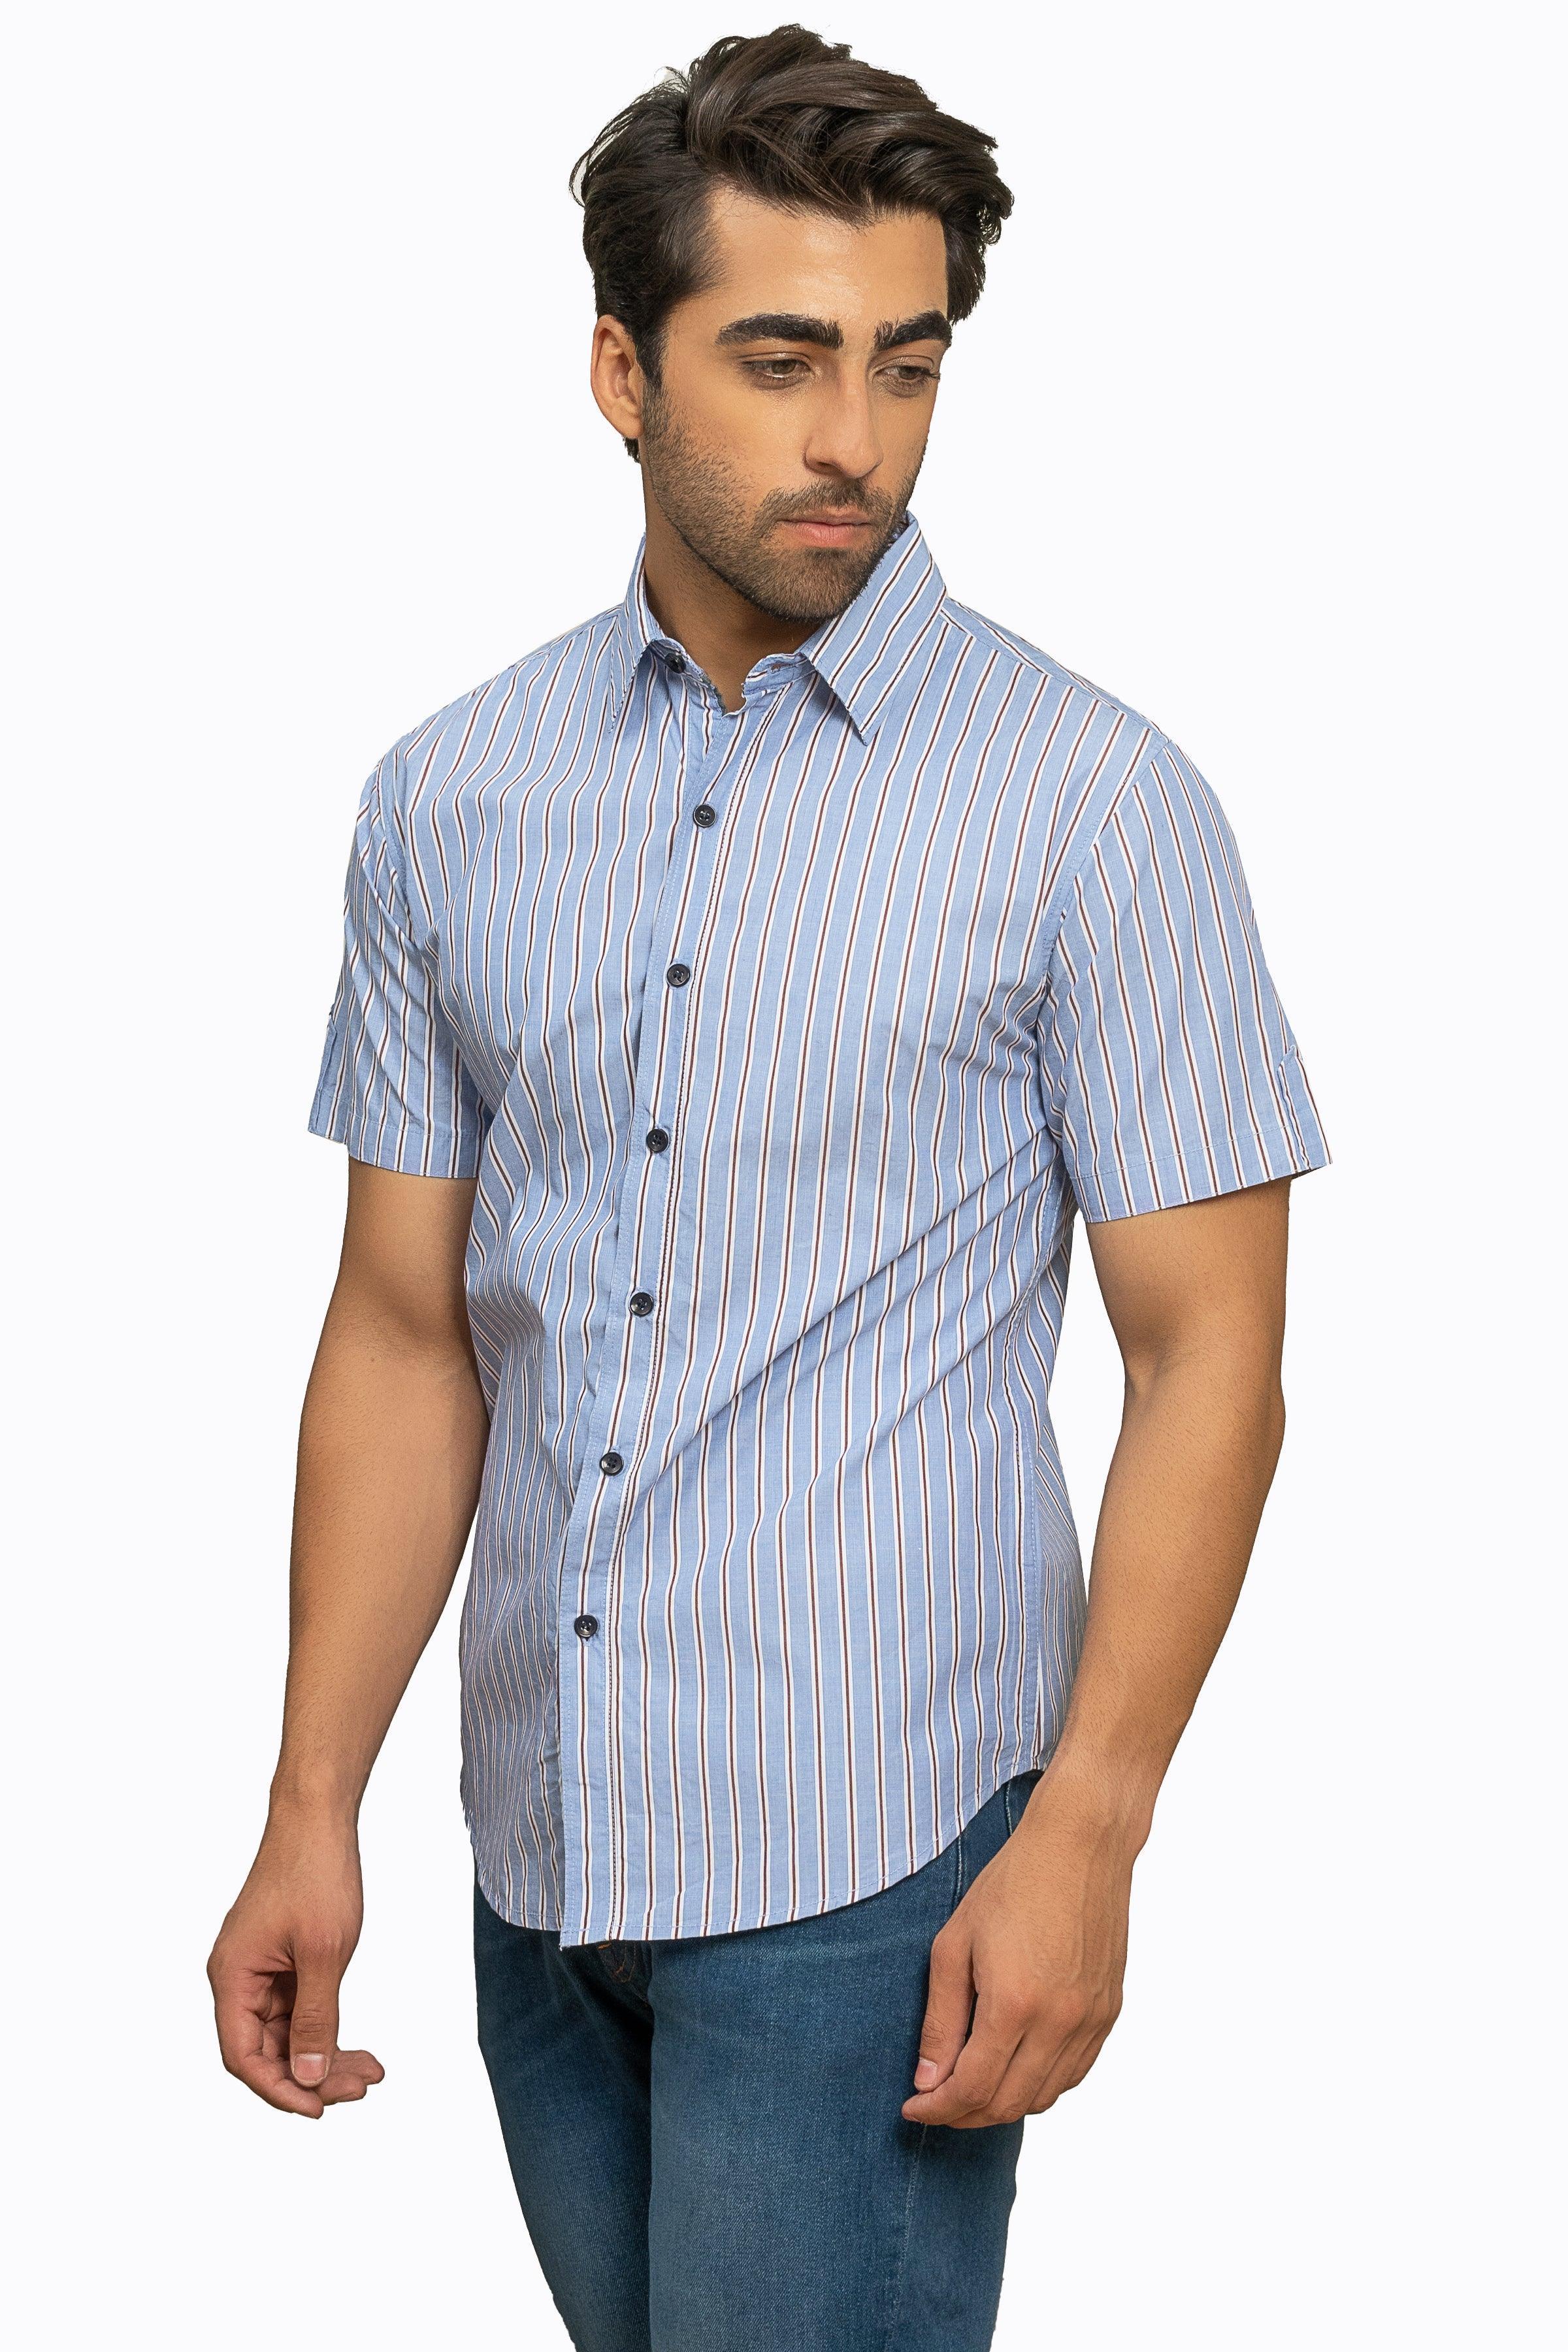 CASUAL SHIRT HALF SLEEVES SKY WHITE LINE at Charcoal Clothing